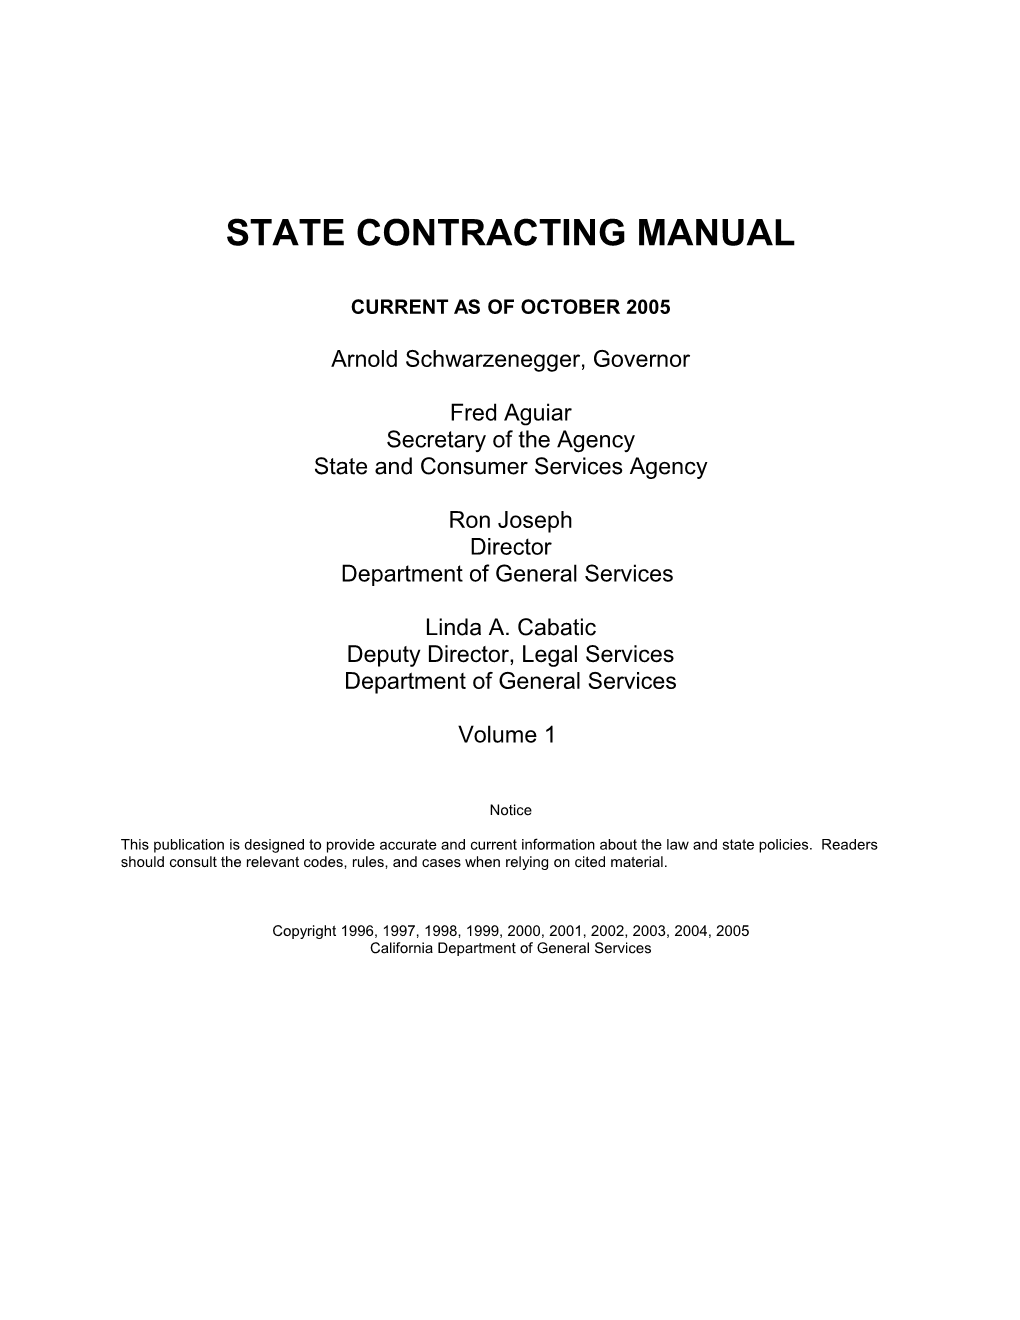 State Contracting Manual